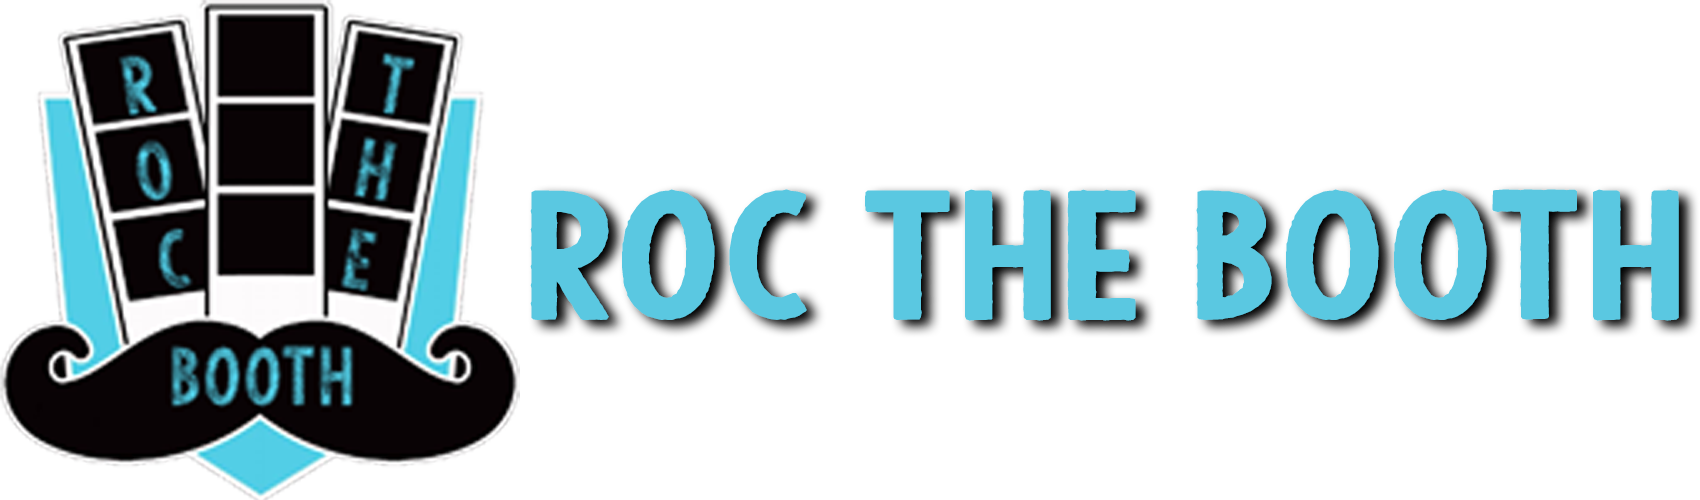 Roc The Booth Logo